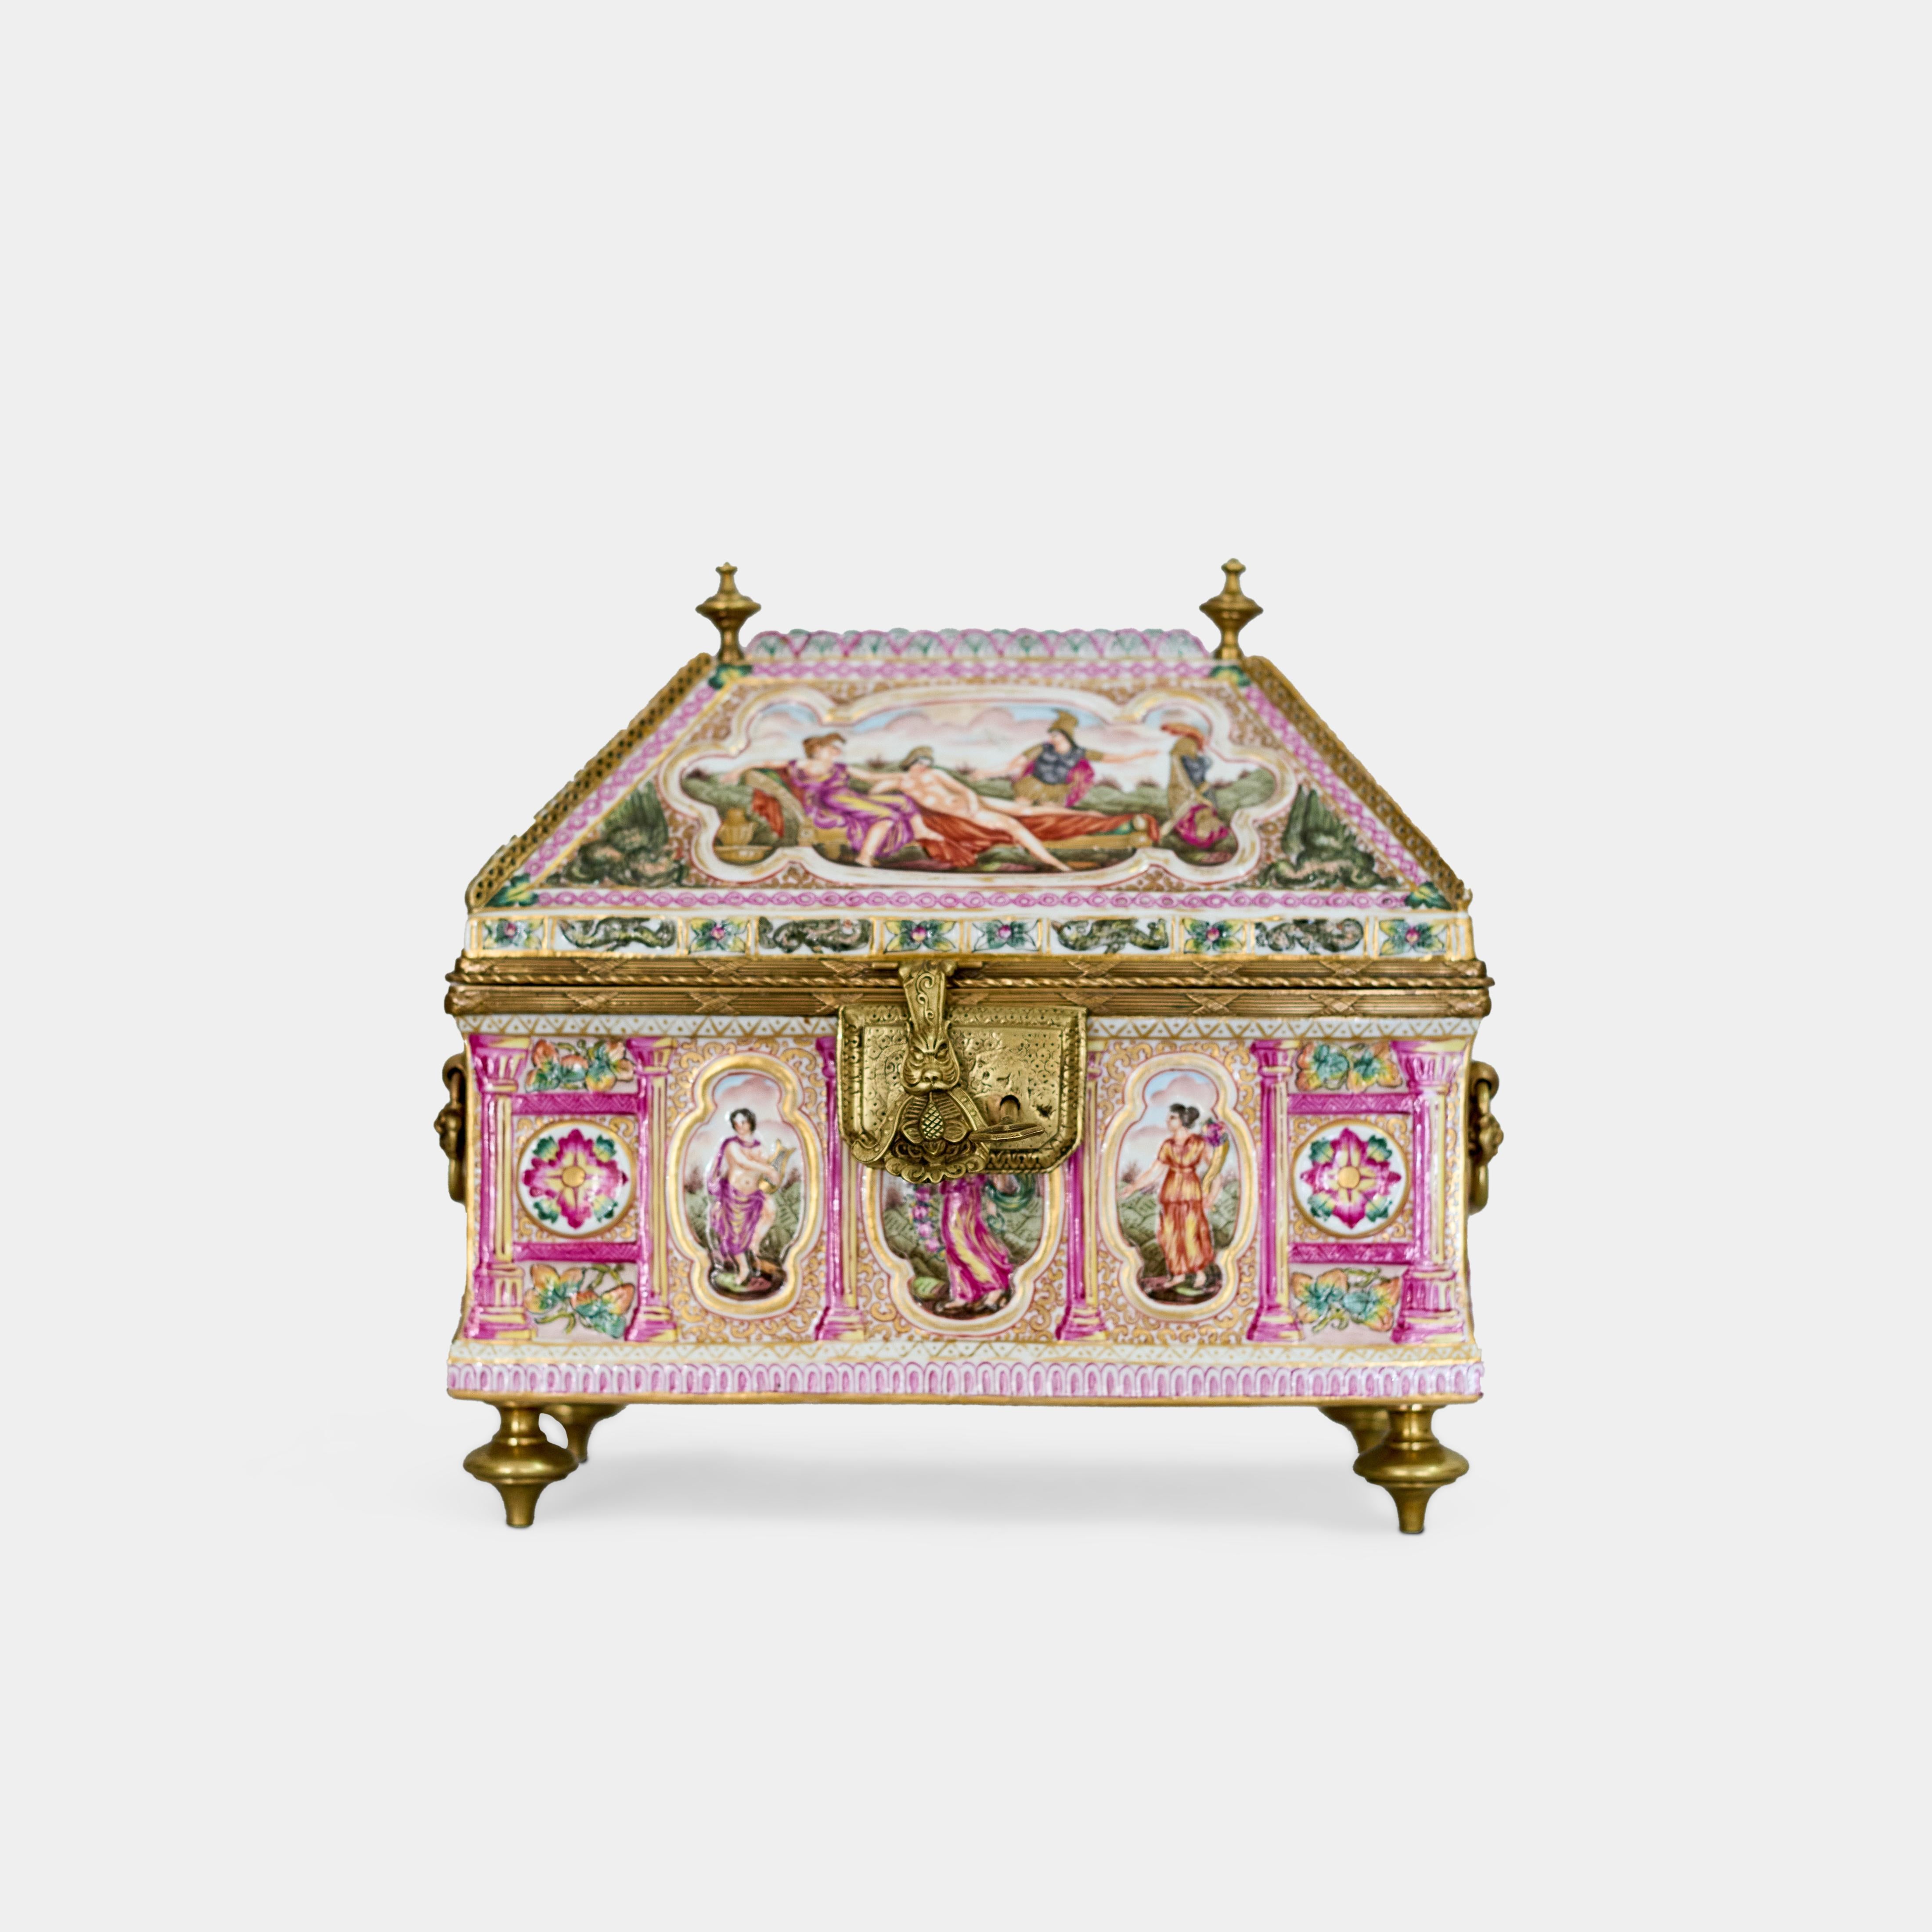 This large antique Italian Capodimonte hinged box from Italy around 1900 is a treasure adorned with captivating Roman scenes. The intricate detailing on this box likely showcases classical motifs and imagery, a hallmark of Capodimonte